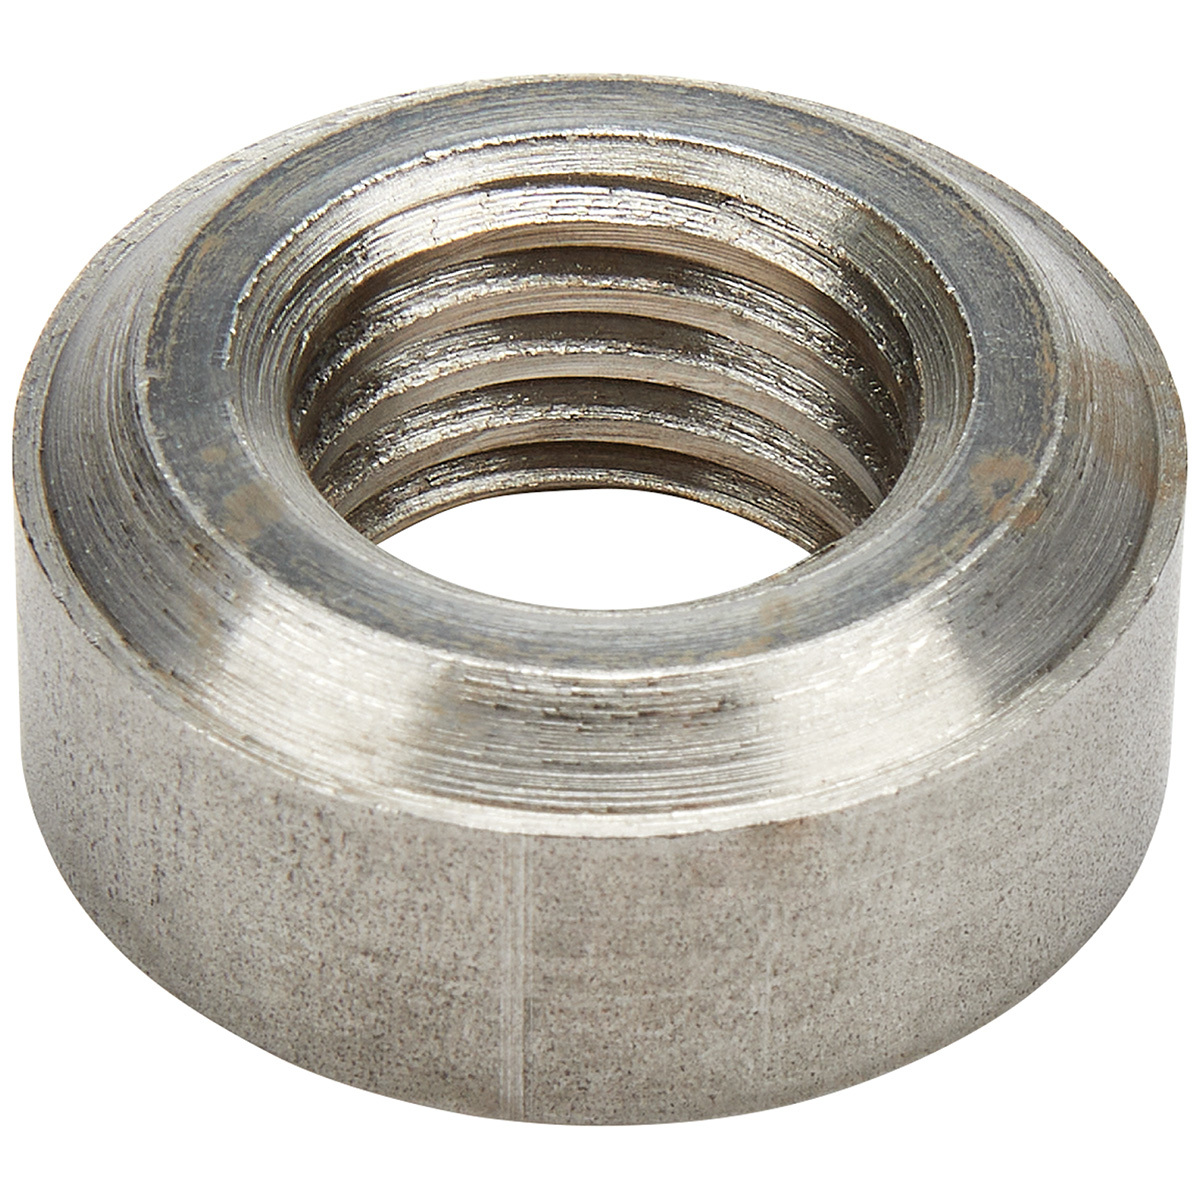 Weld Nut for 56070/71 Swivel Sway Bar Bolts